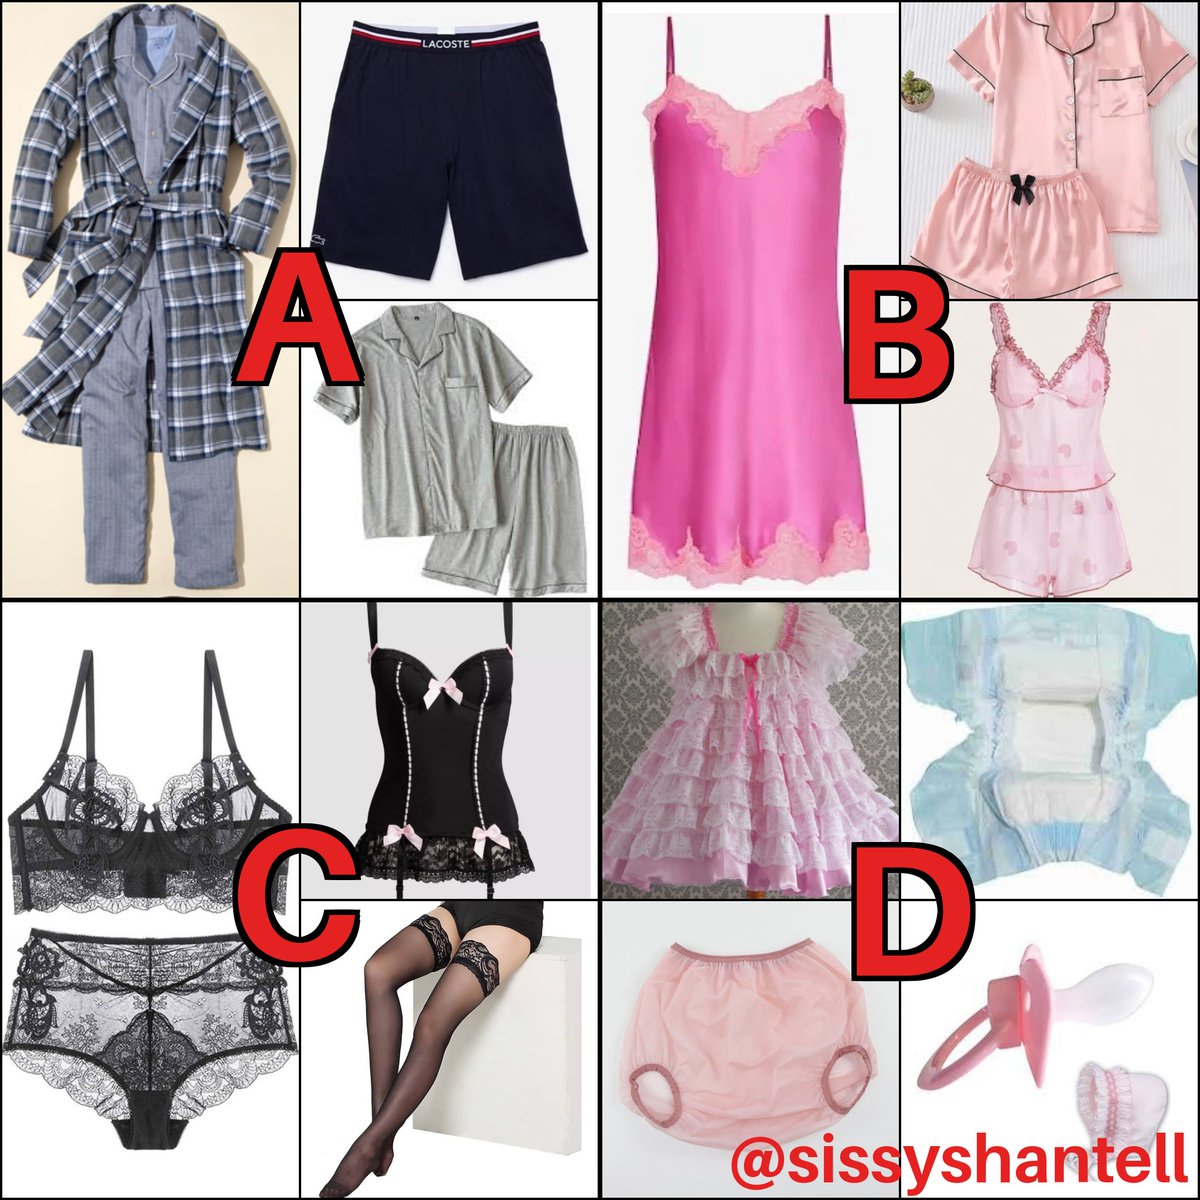 What's YOUR usual bedtime outfit?

Choose the option which is the closest match to your REGULAR everyday nightwear and leave your answer in the comments below (extended comments & explanations for your choice appreciated❤️)